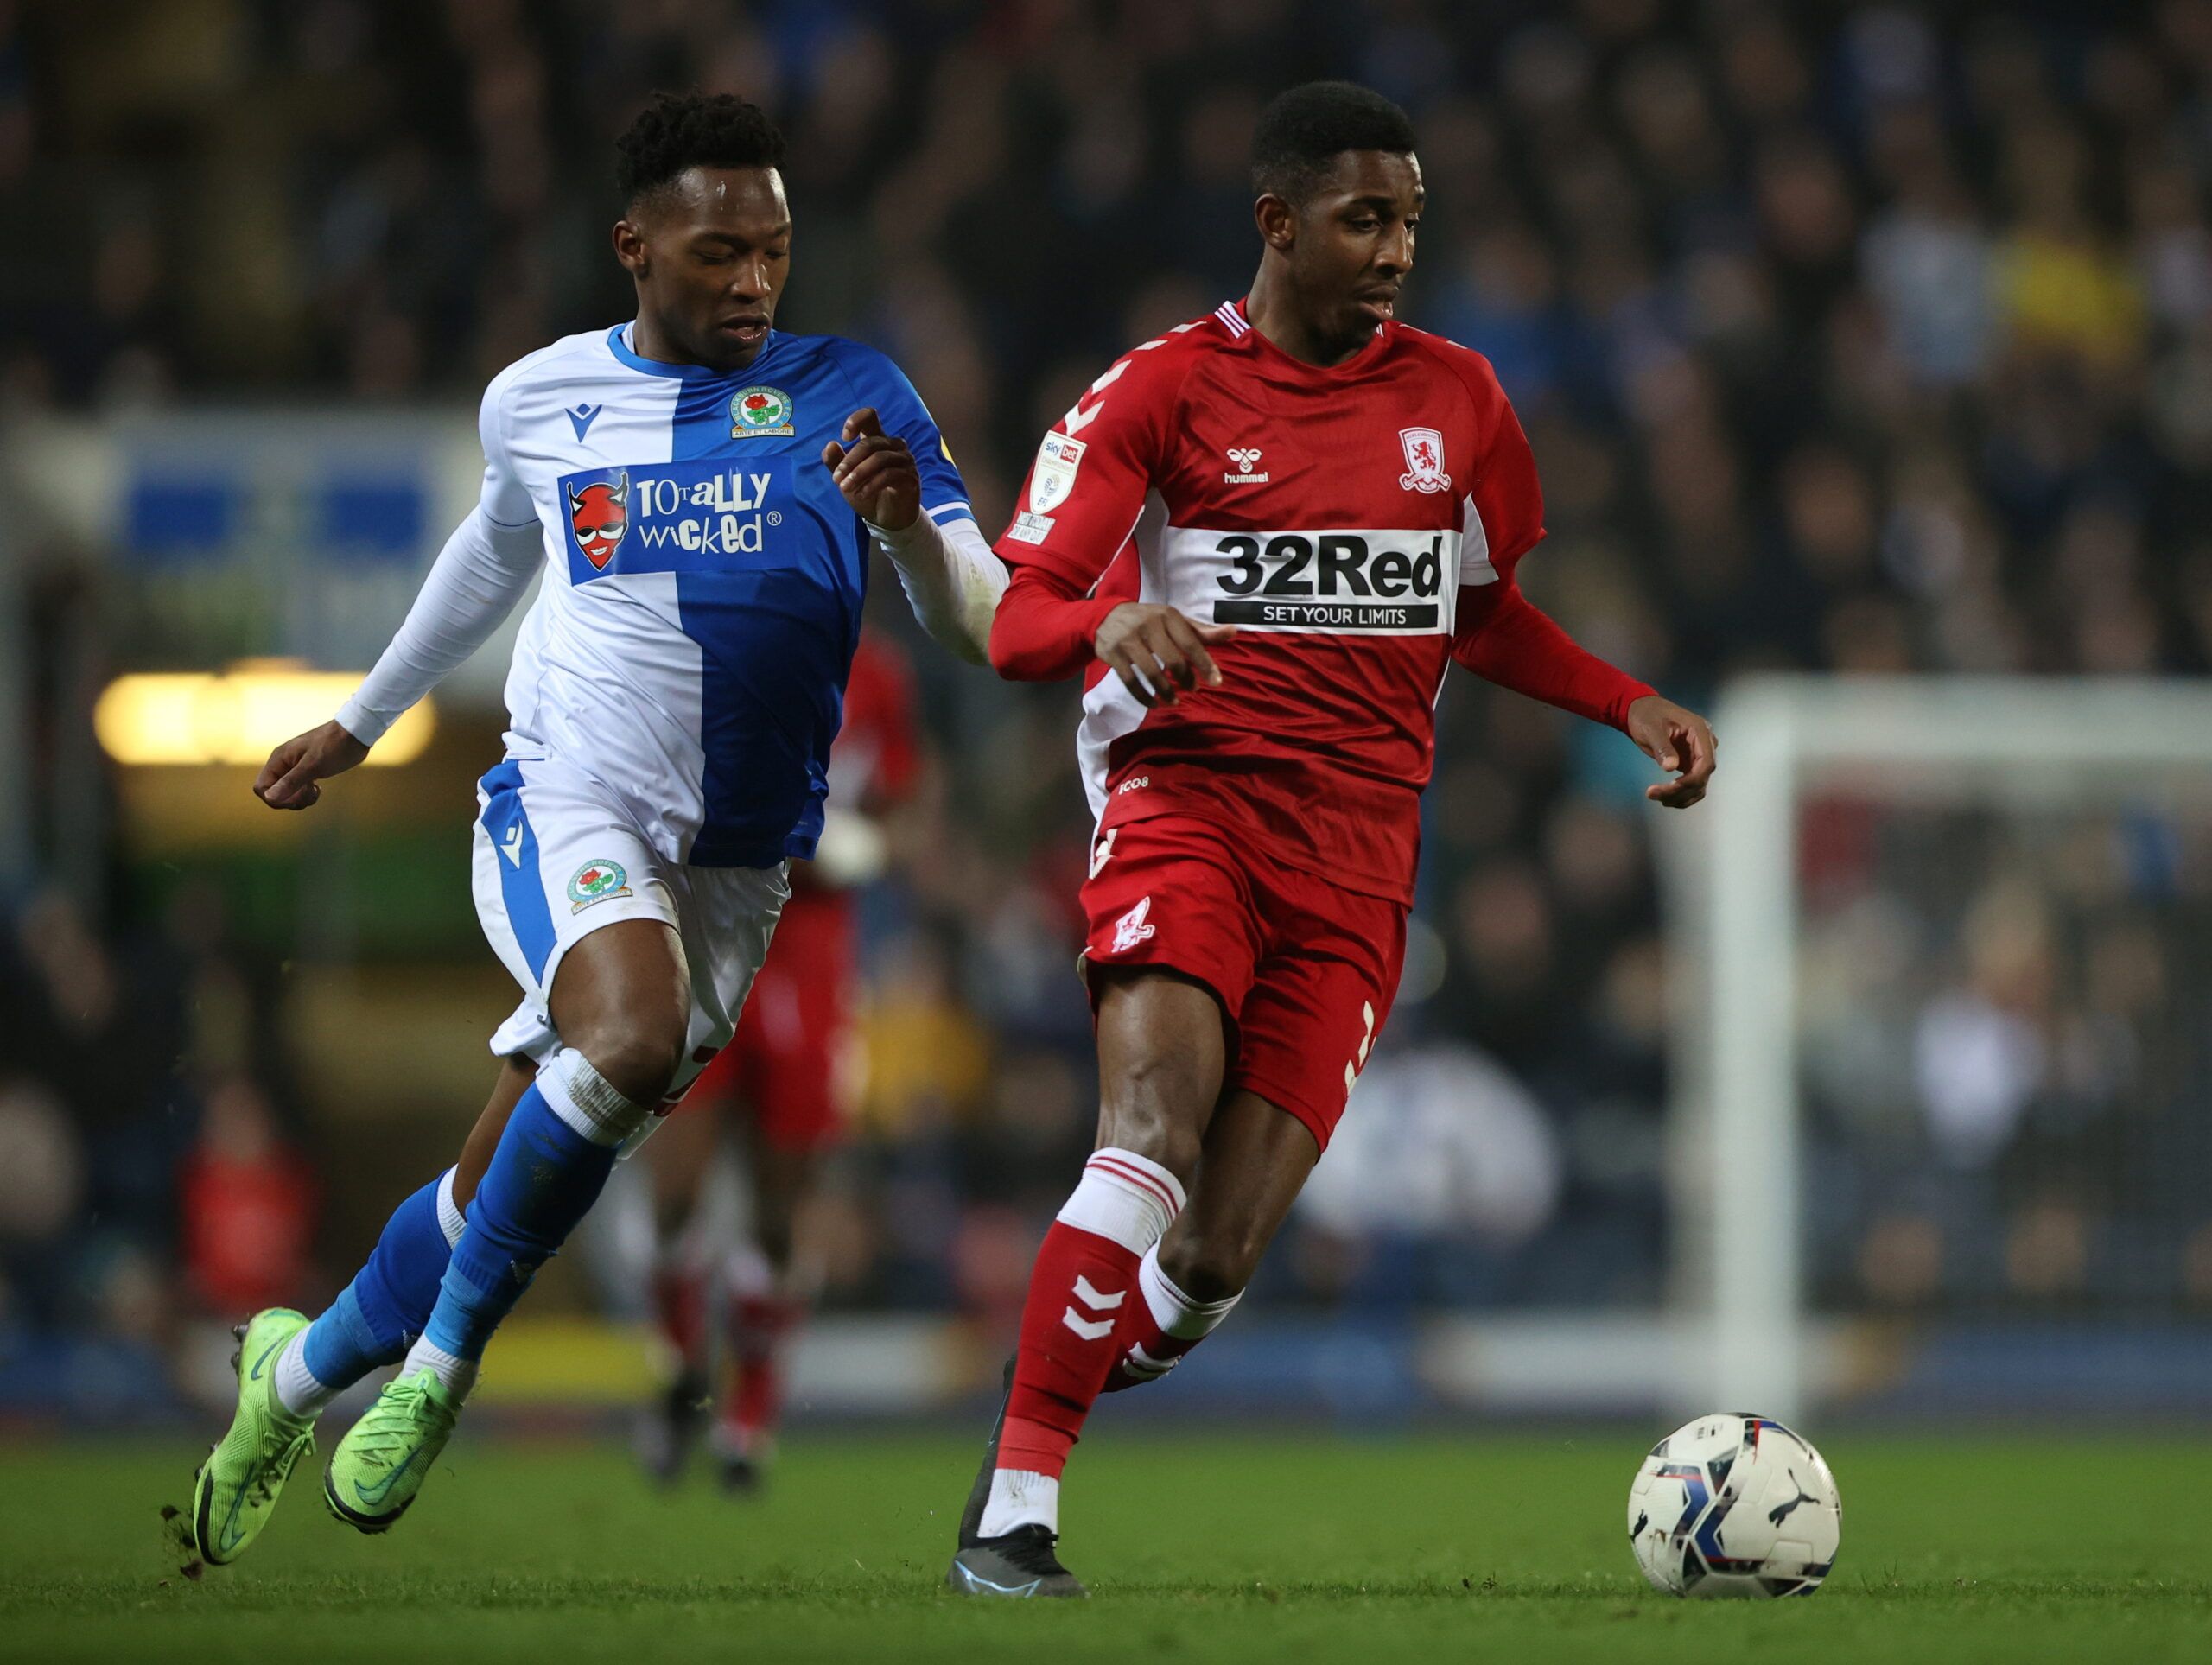 Soccer Football - Championship - Blackburn Rovers v Middlesbrough - Ewood Park, Blackburn, Britain - January 24, 2022  Middlesbrough's Isaiah Jones in action with Blackburn Rovers' Tayo Edun  Action Images/Molly Darlington  EDITORIAL USE ONLY. No use with unauthorized audio, video, data, fixture lists, club/league logos or 